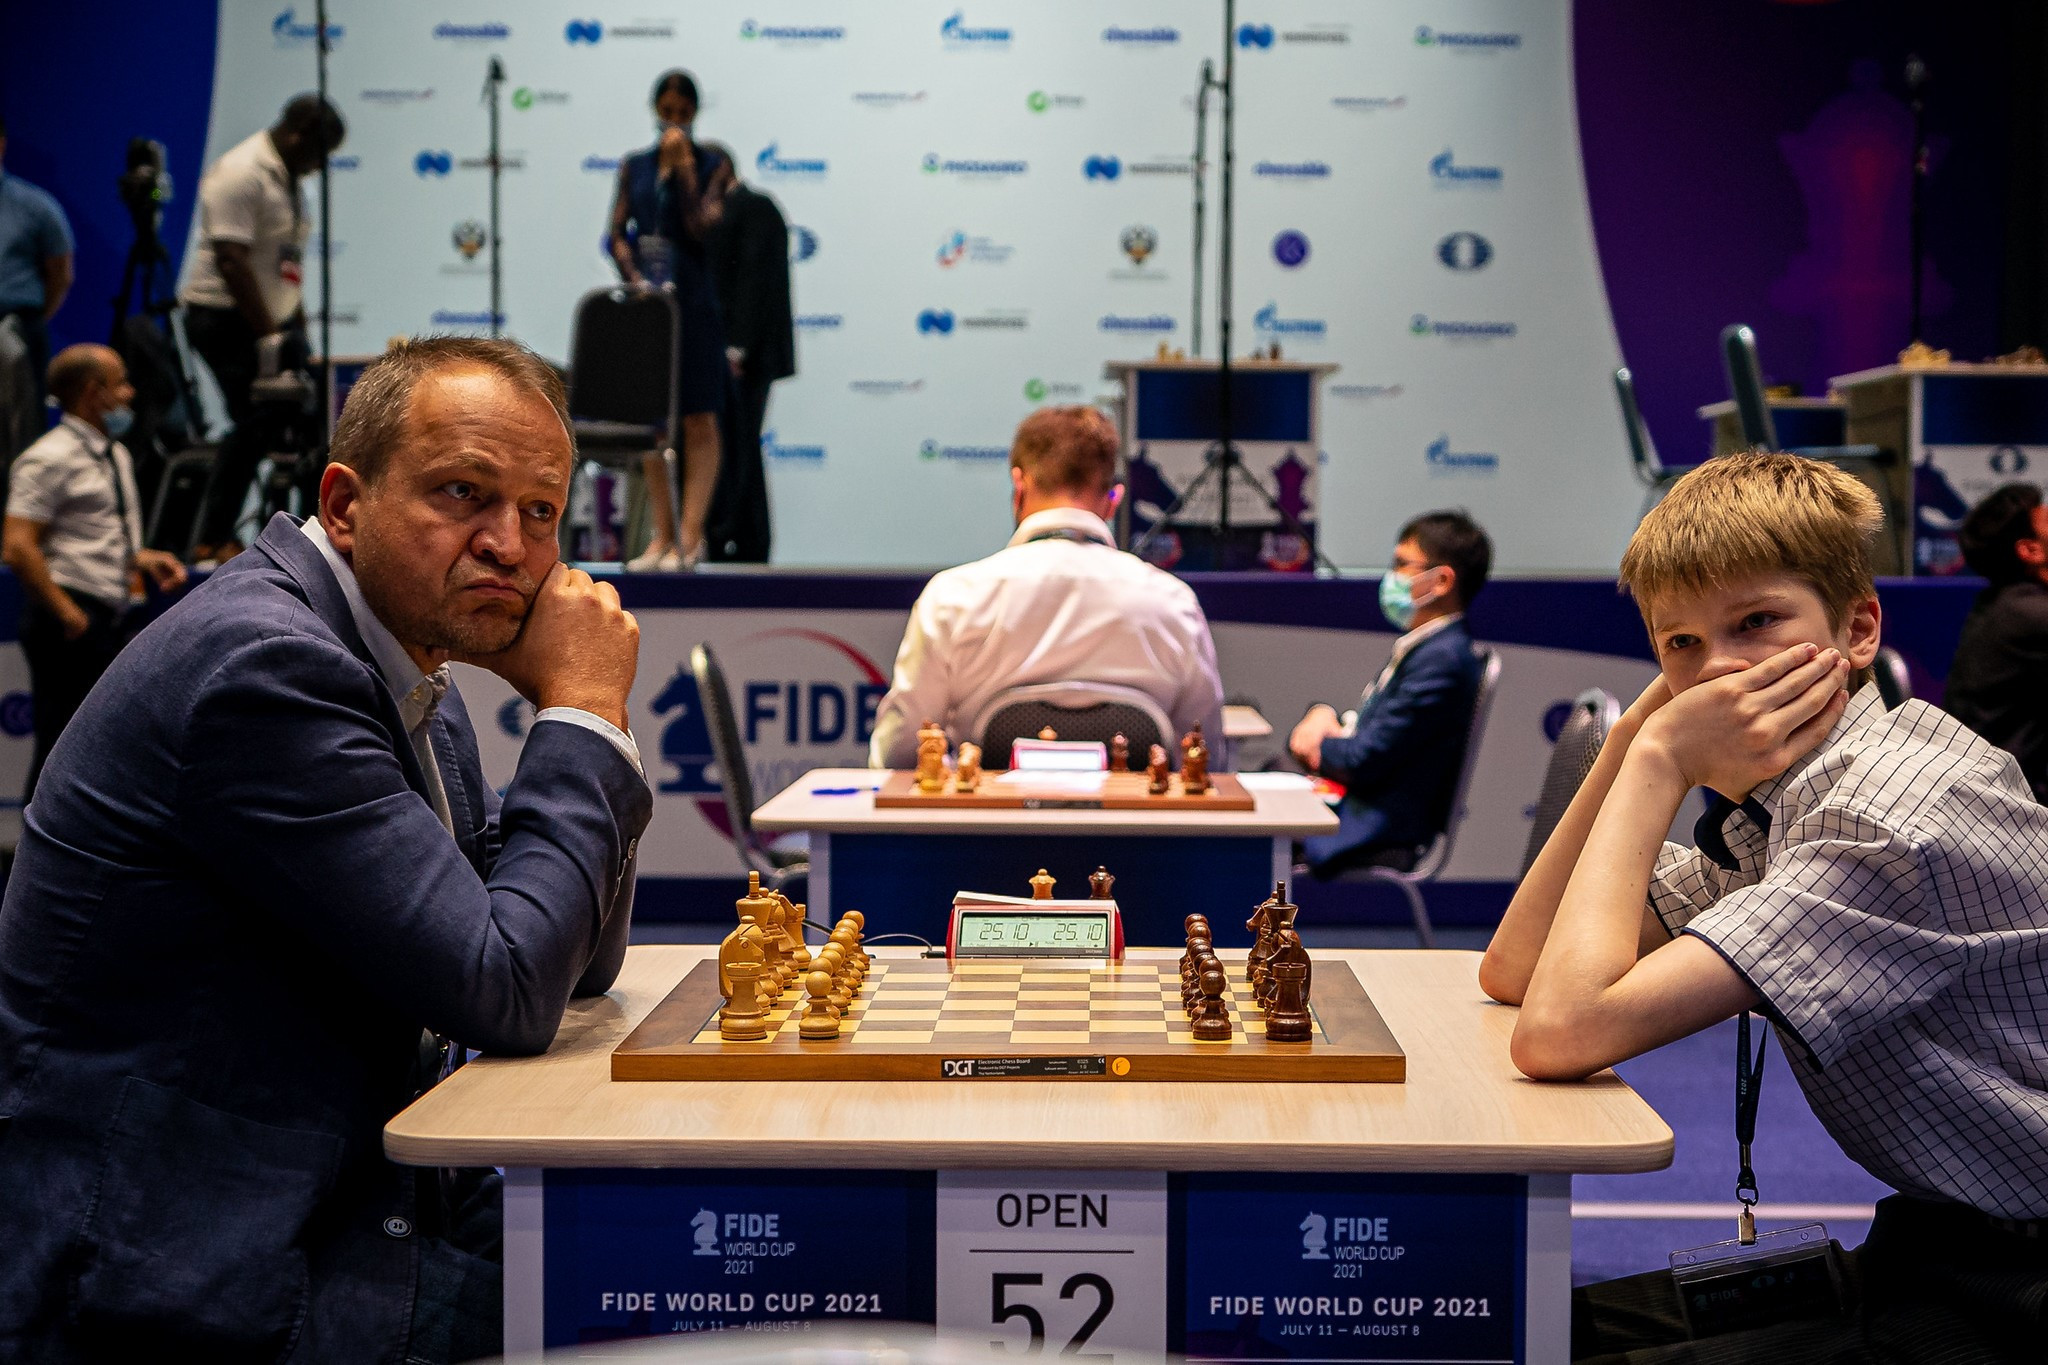 FIDE increases prize fund for World Senior Chess Championship